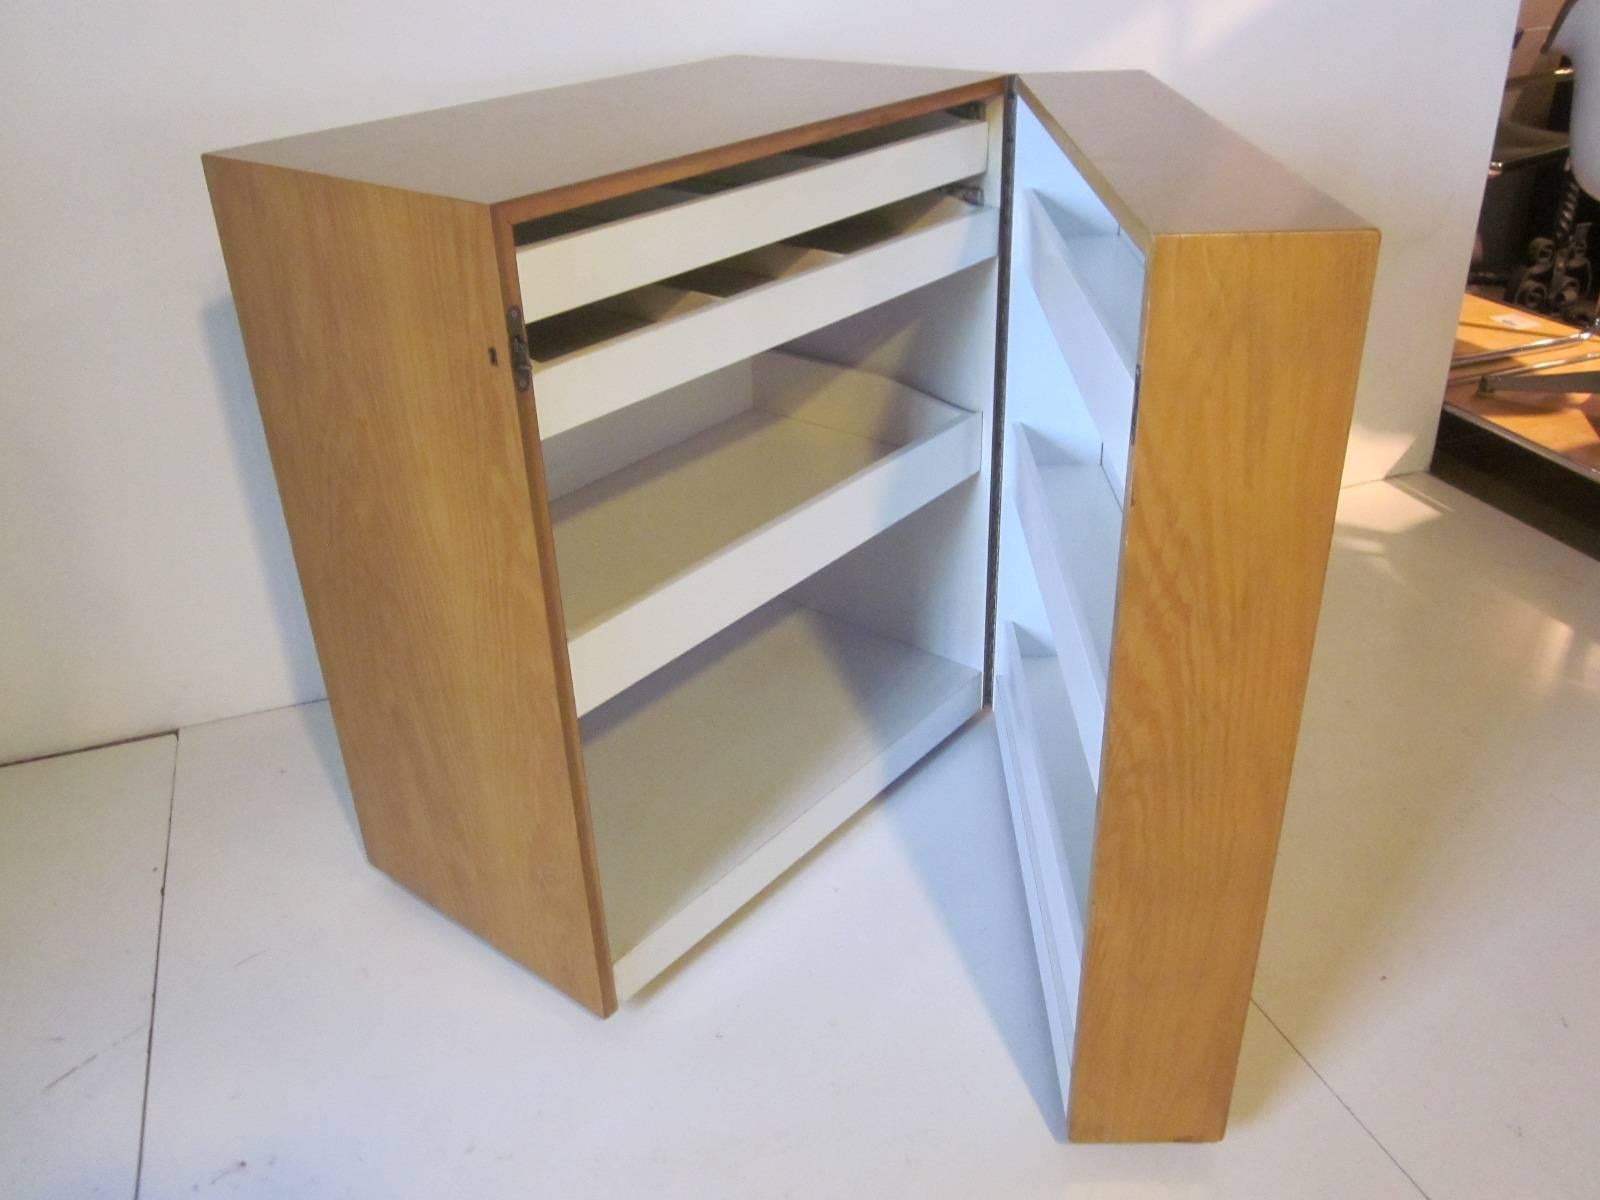 A unique sever or bar in the shape of a cube with the front door on a wheel for easy opening, inside there's three pull-out shelves with compartments a lower storage area and three shelves on the door. Housed in a flamed wood grain cabinet finished